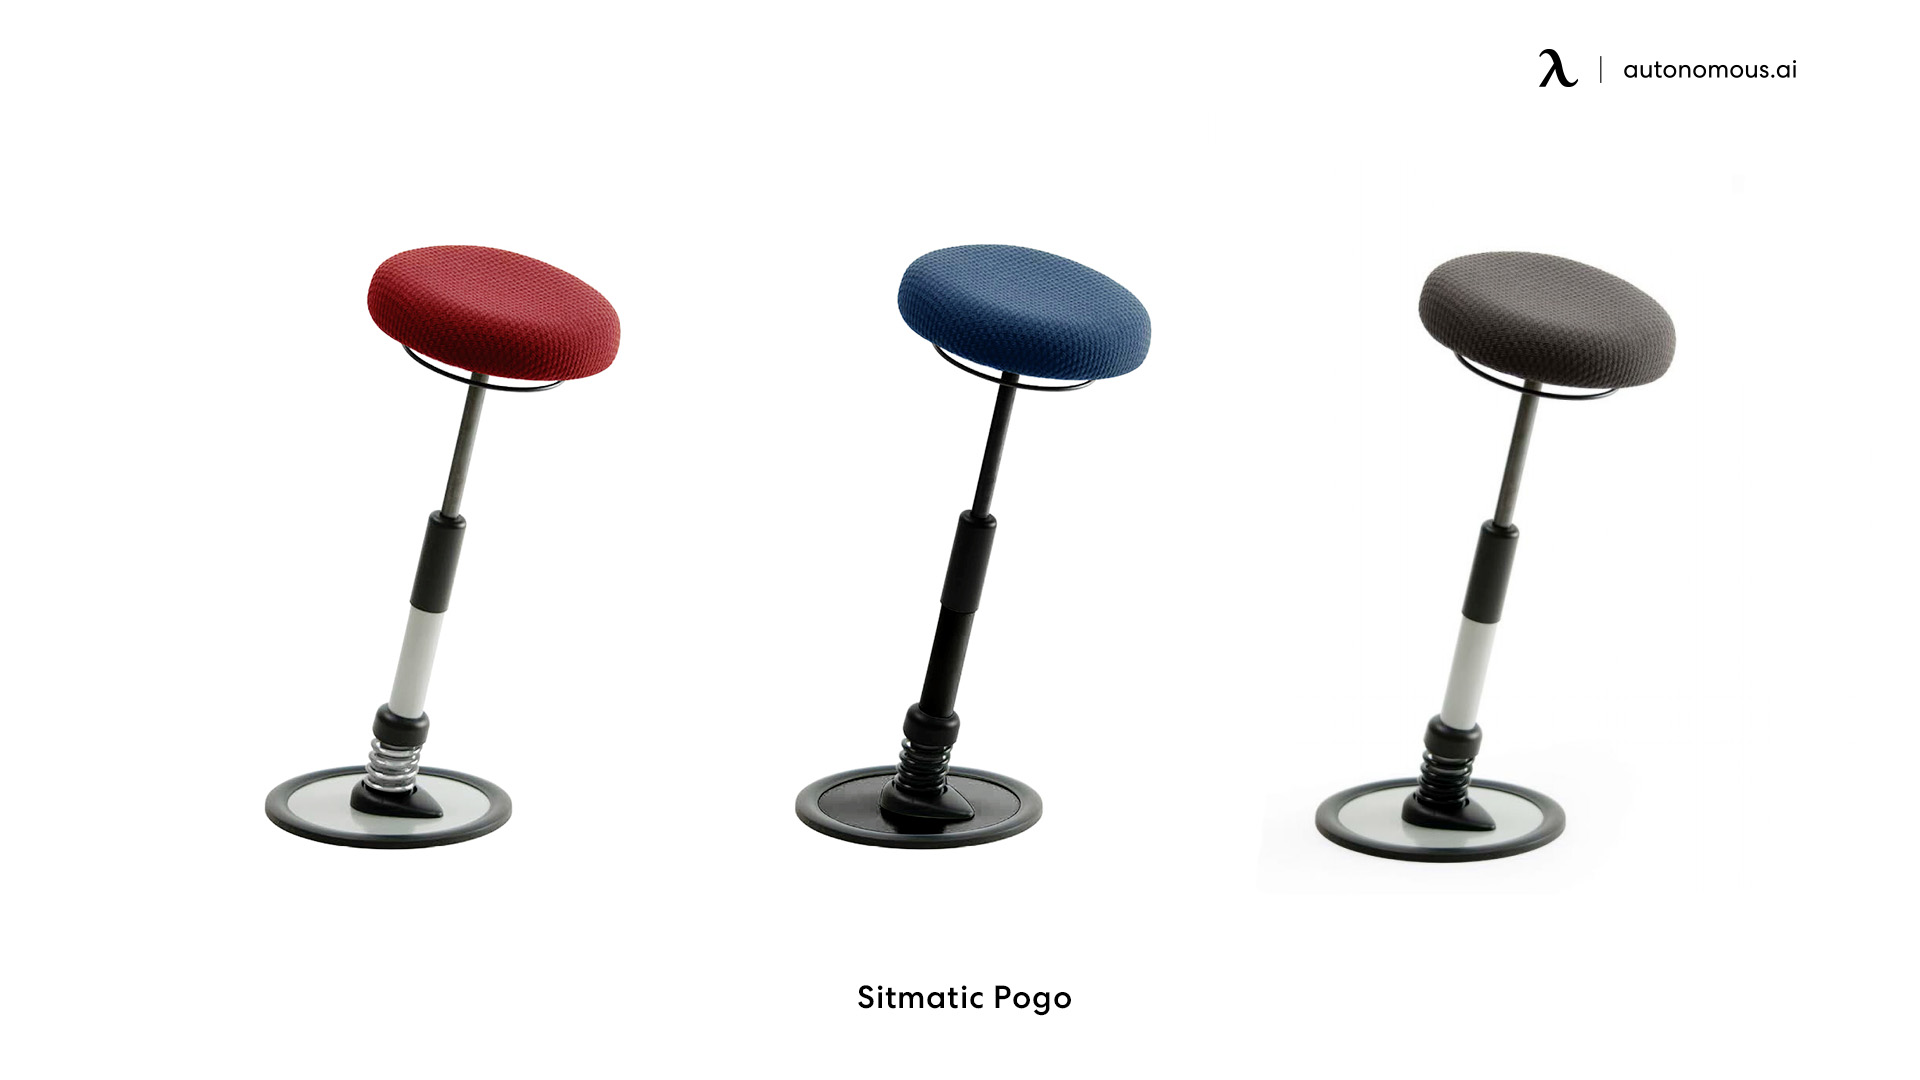 Sitmatic Pogo standing support chair